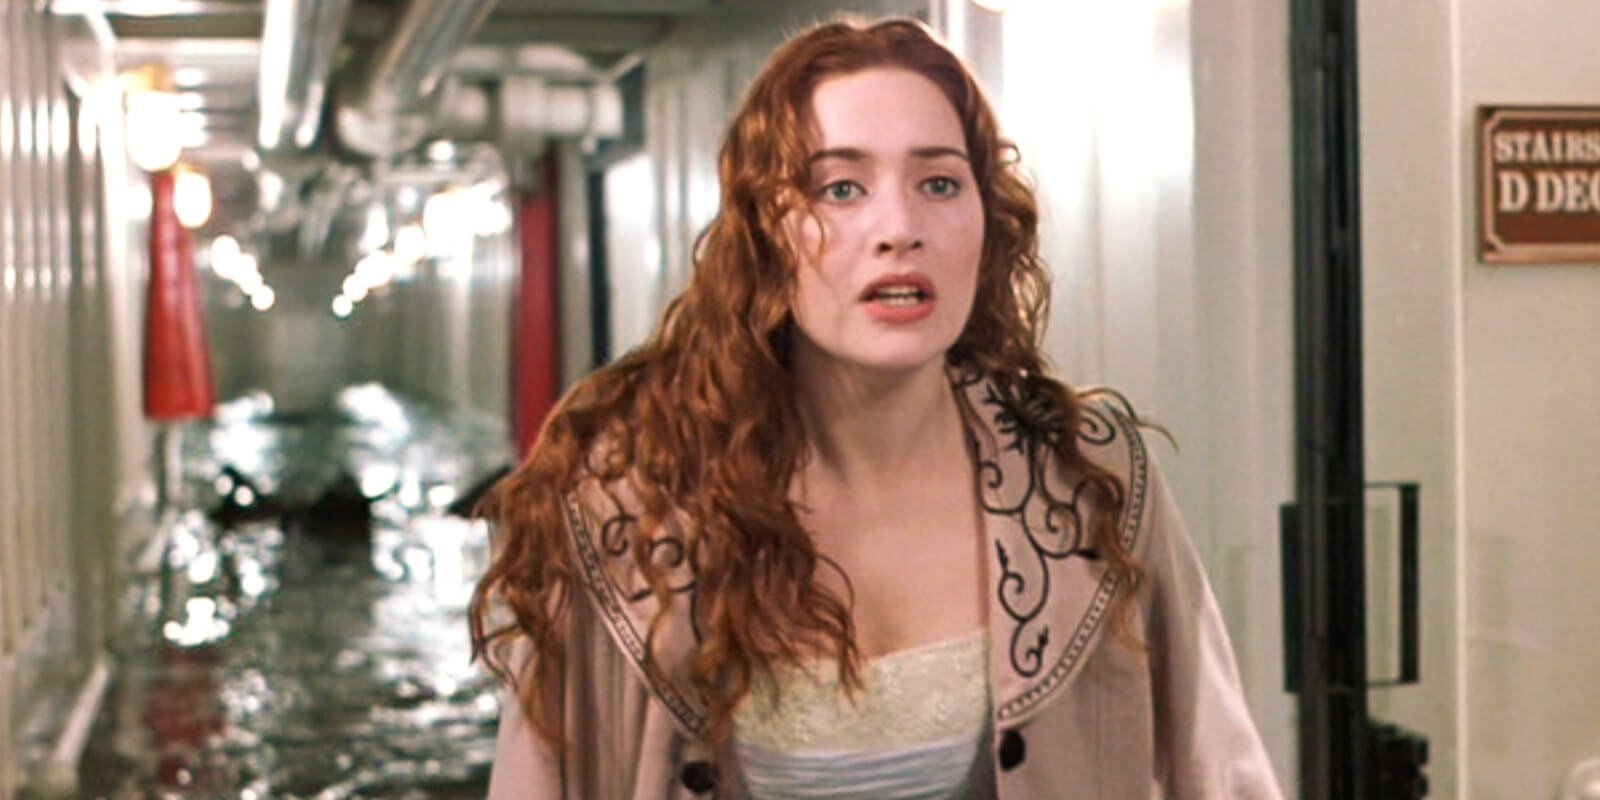 Kate Winslet starred in the 1997 blockbuster film 'Titanic' directed by James Cameron.